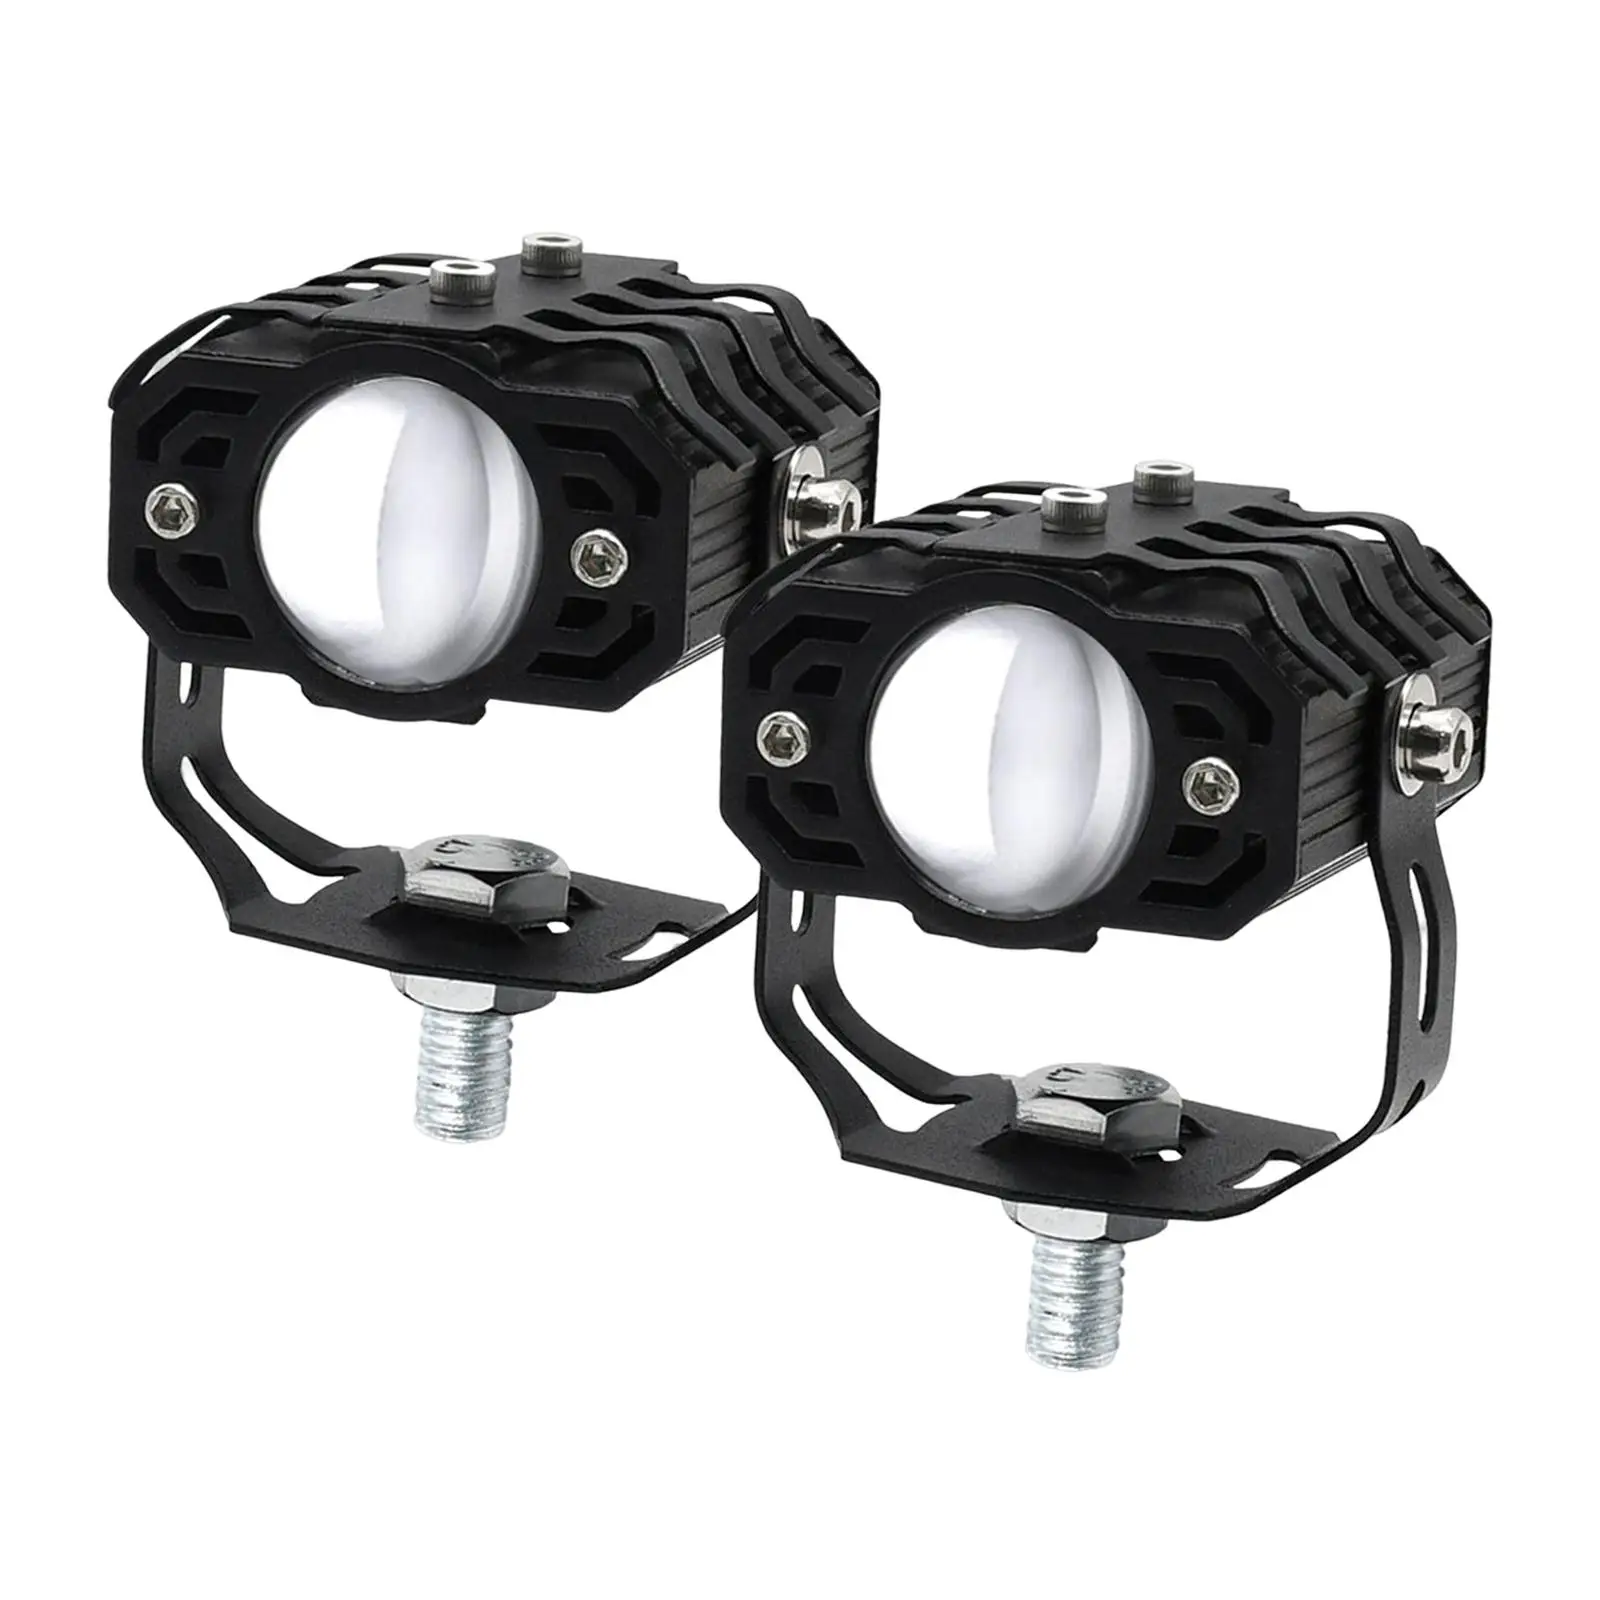 2 Pieces Motorcycle Auxiliary Driving Lights Spotlight for Boat Truck